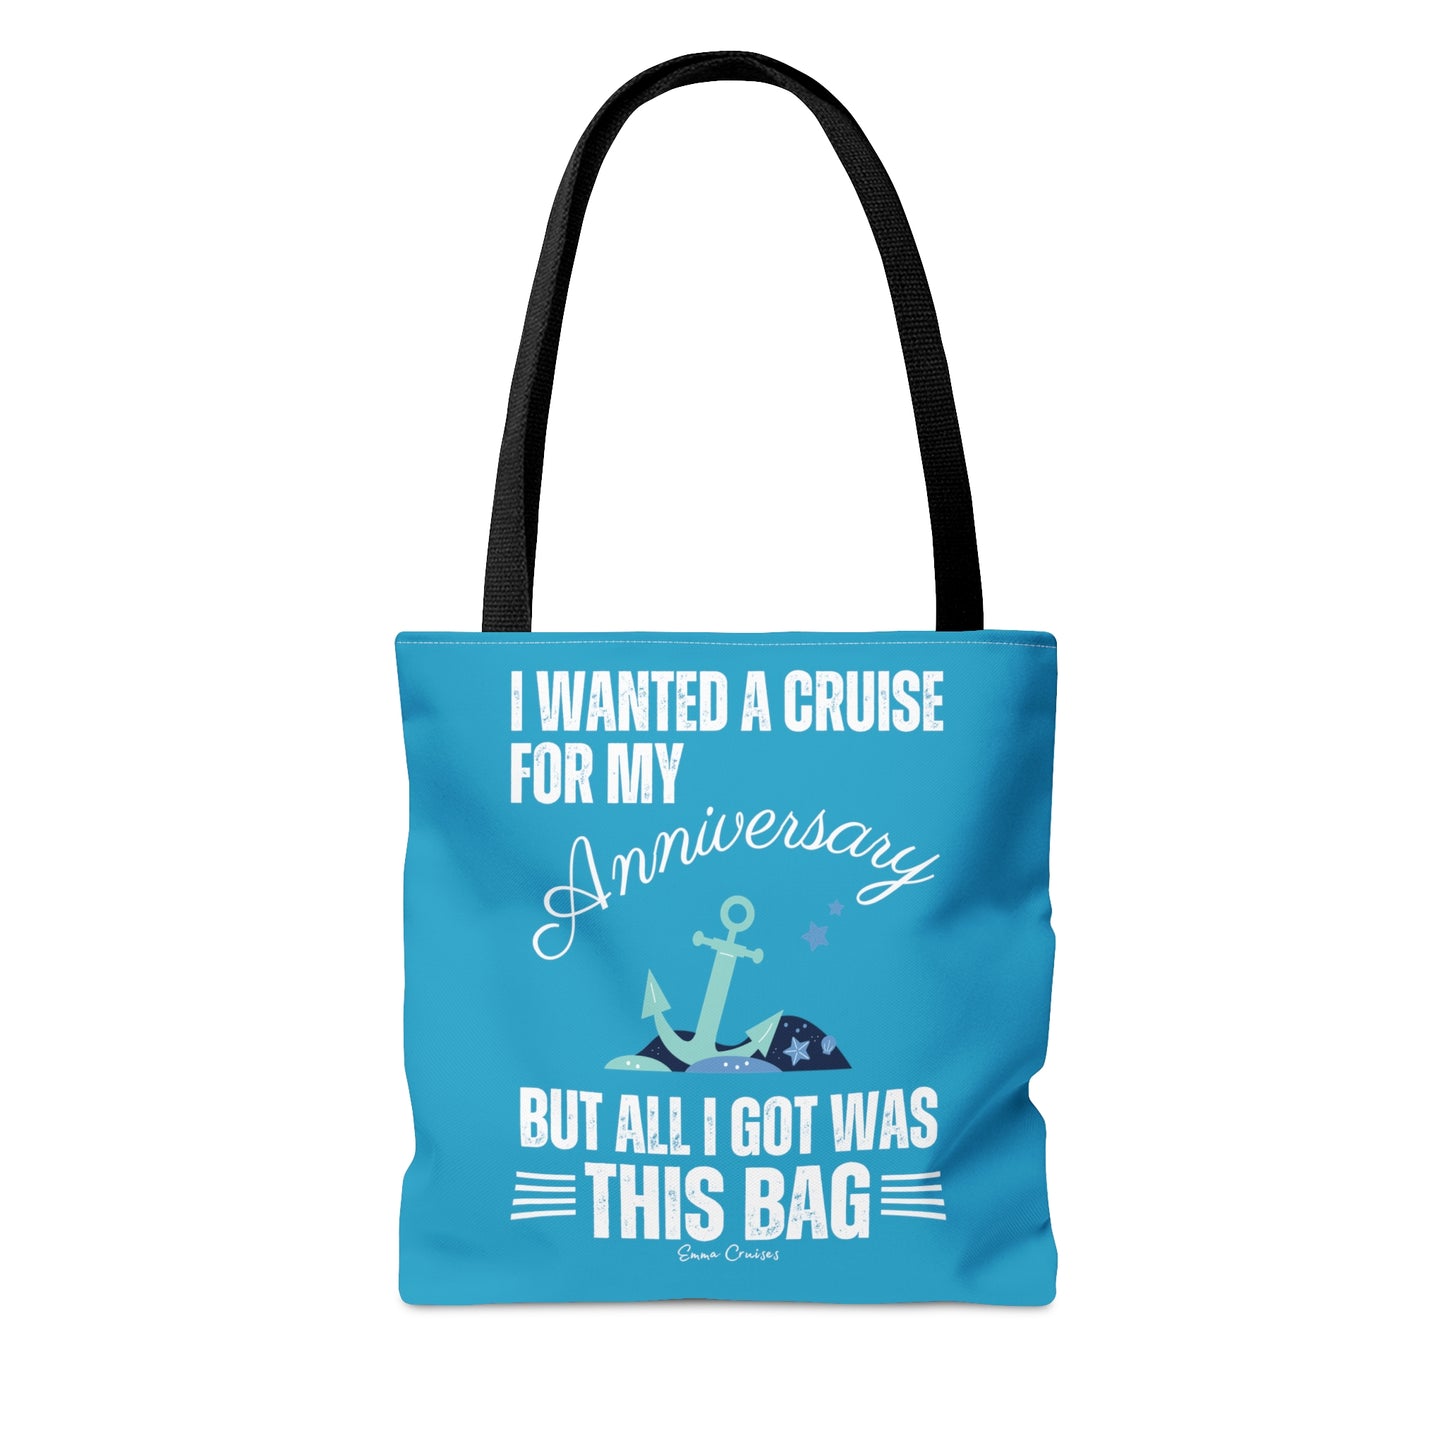 I Wanted a Cruise for My Anniversary - Bag